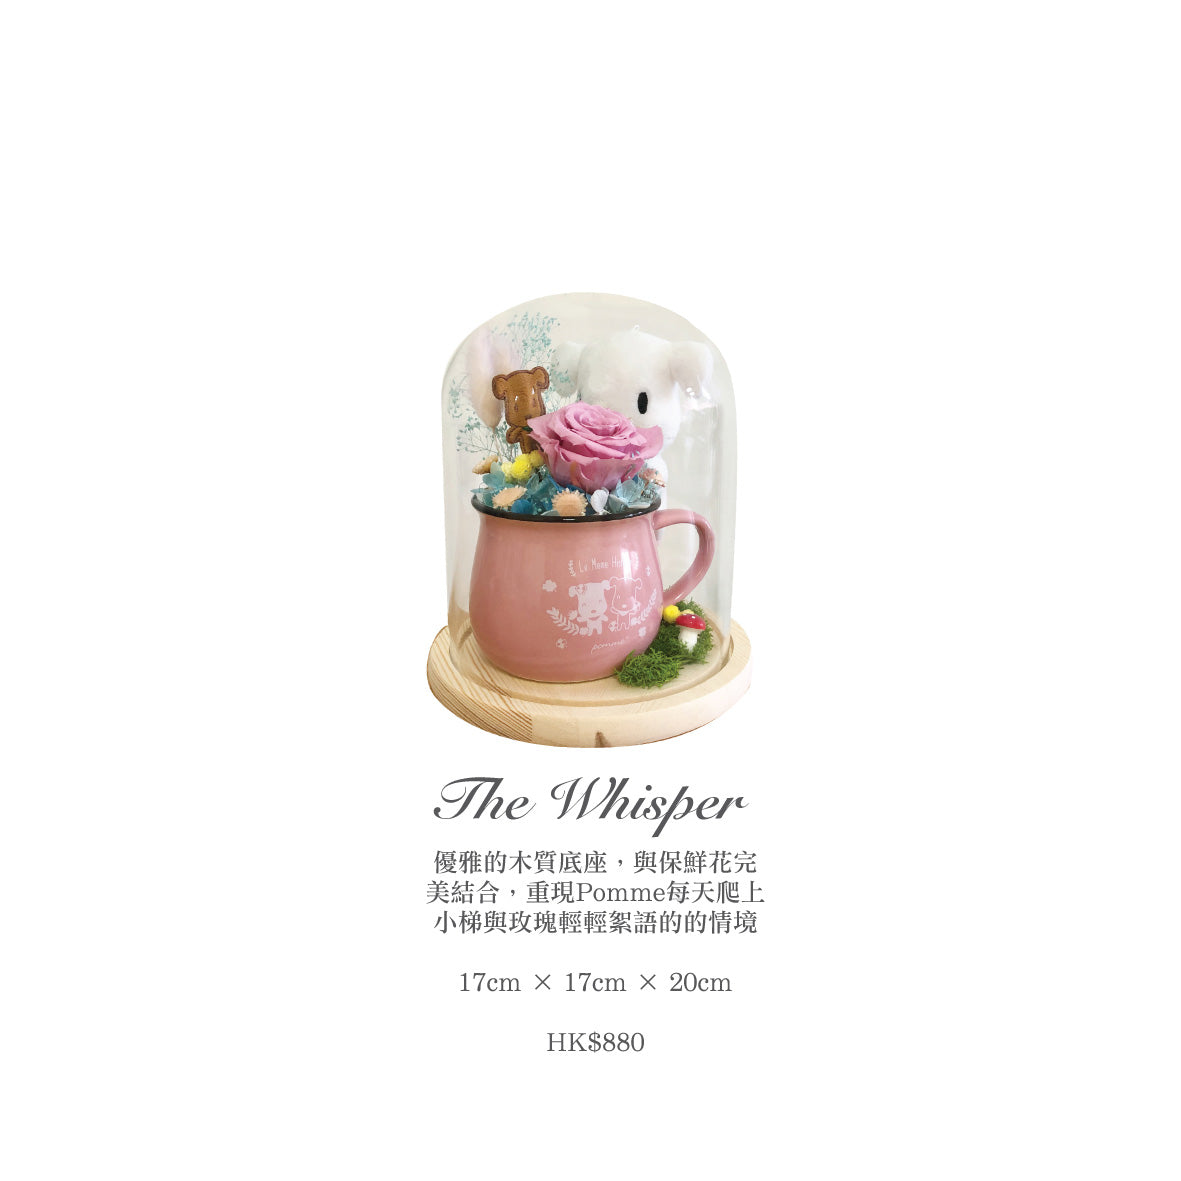 Japan Preserved Bouquet - The Whisper